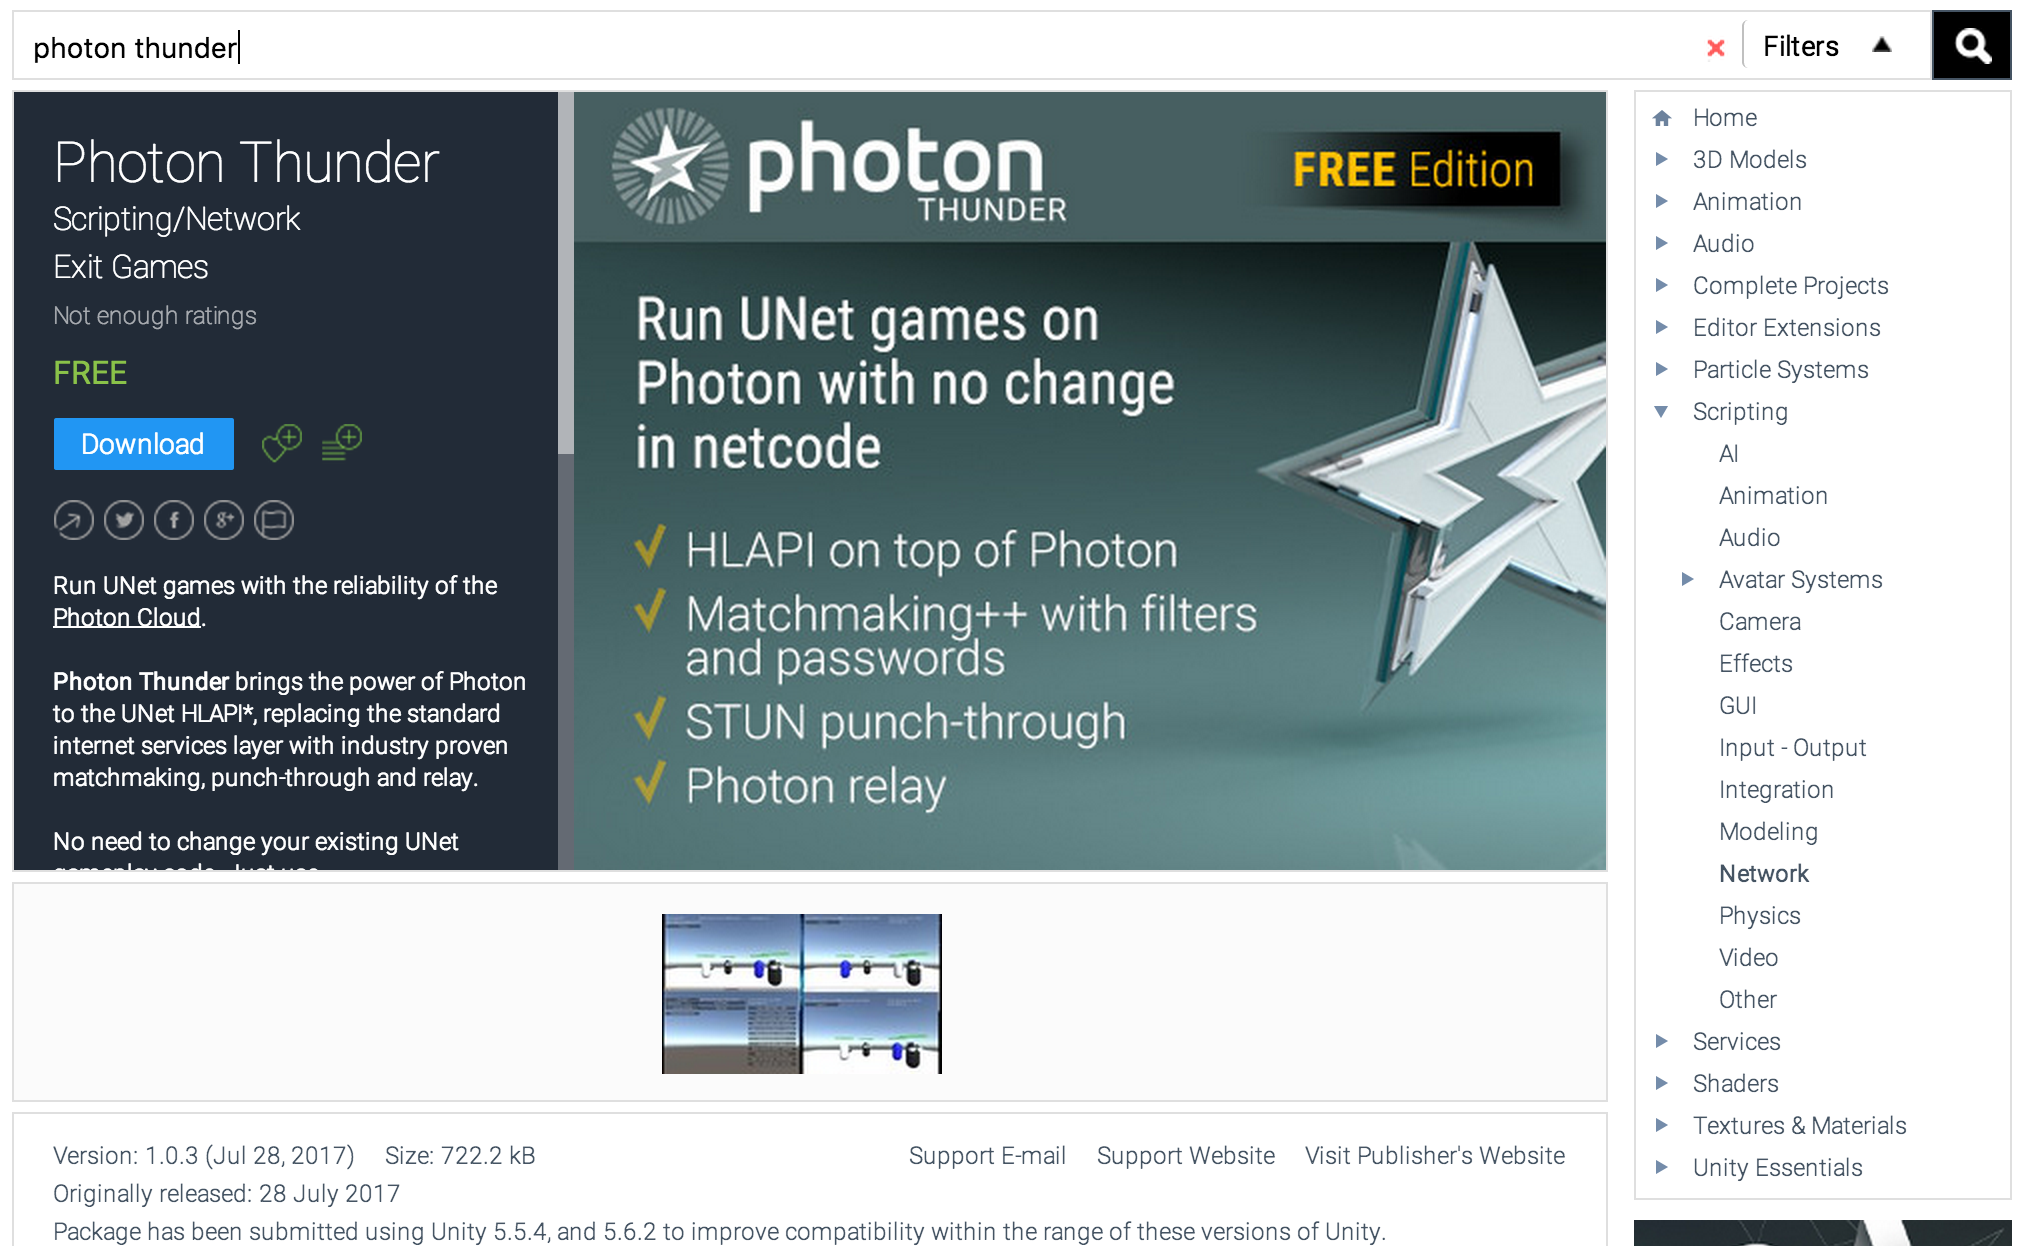 photon thunder package on the unity asset store